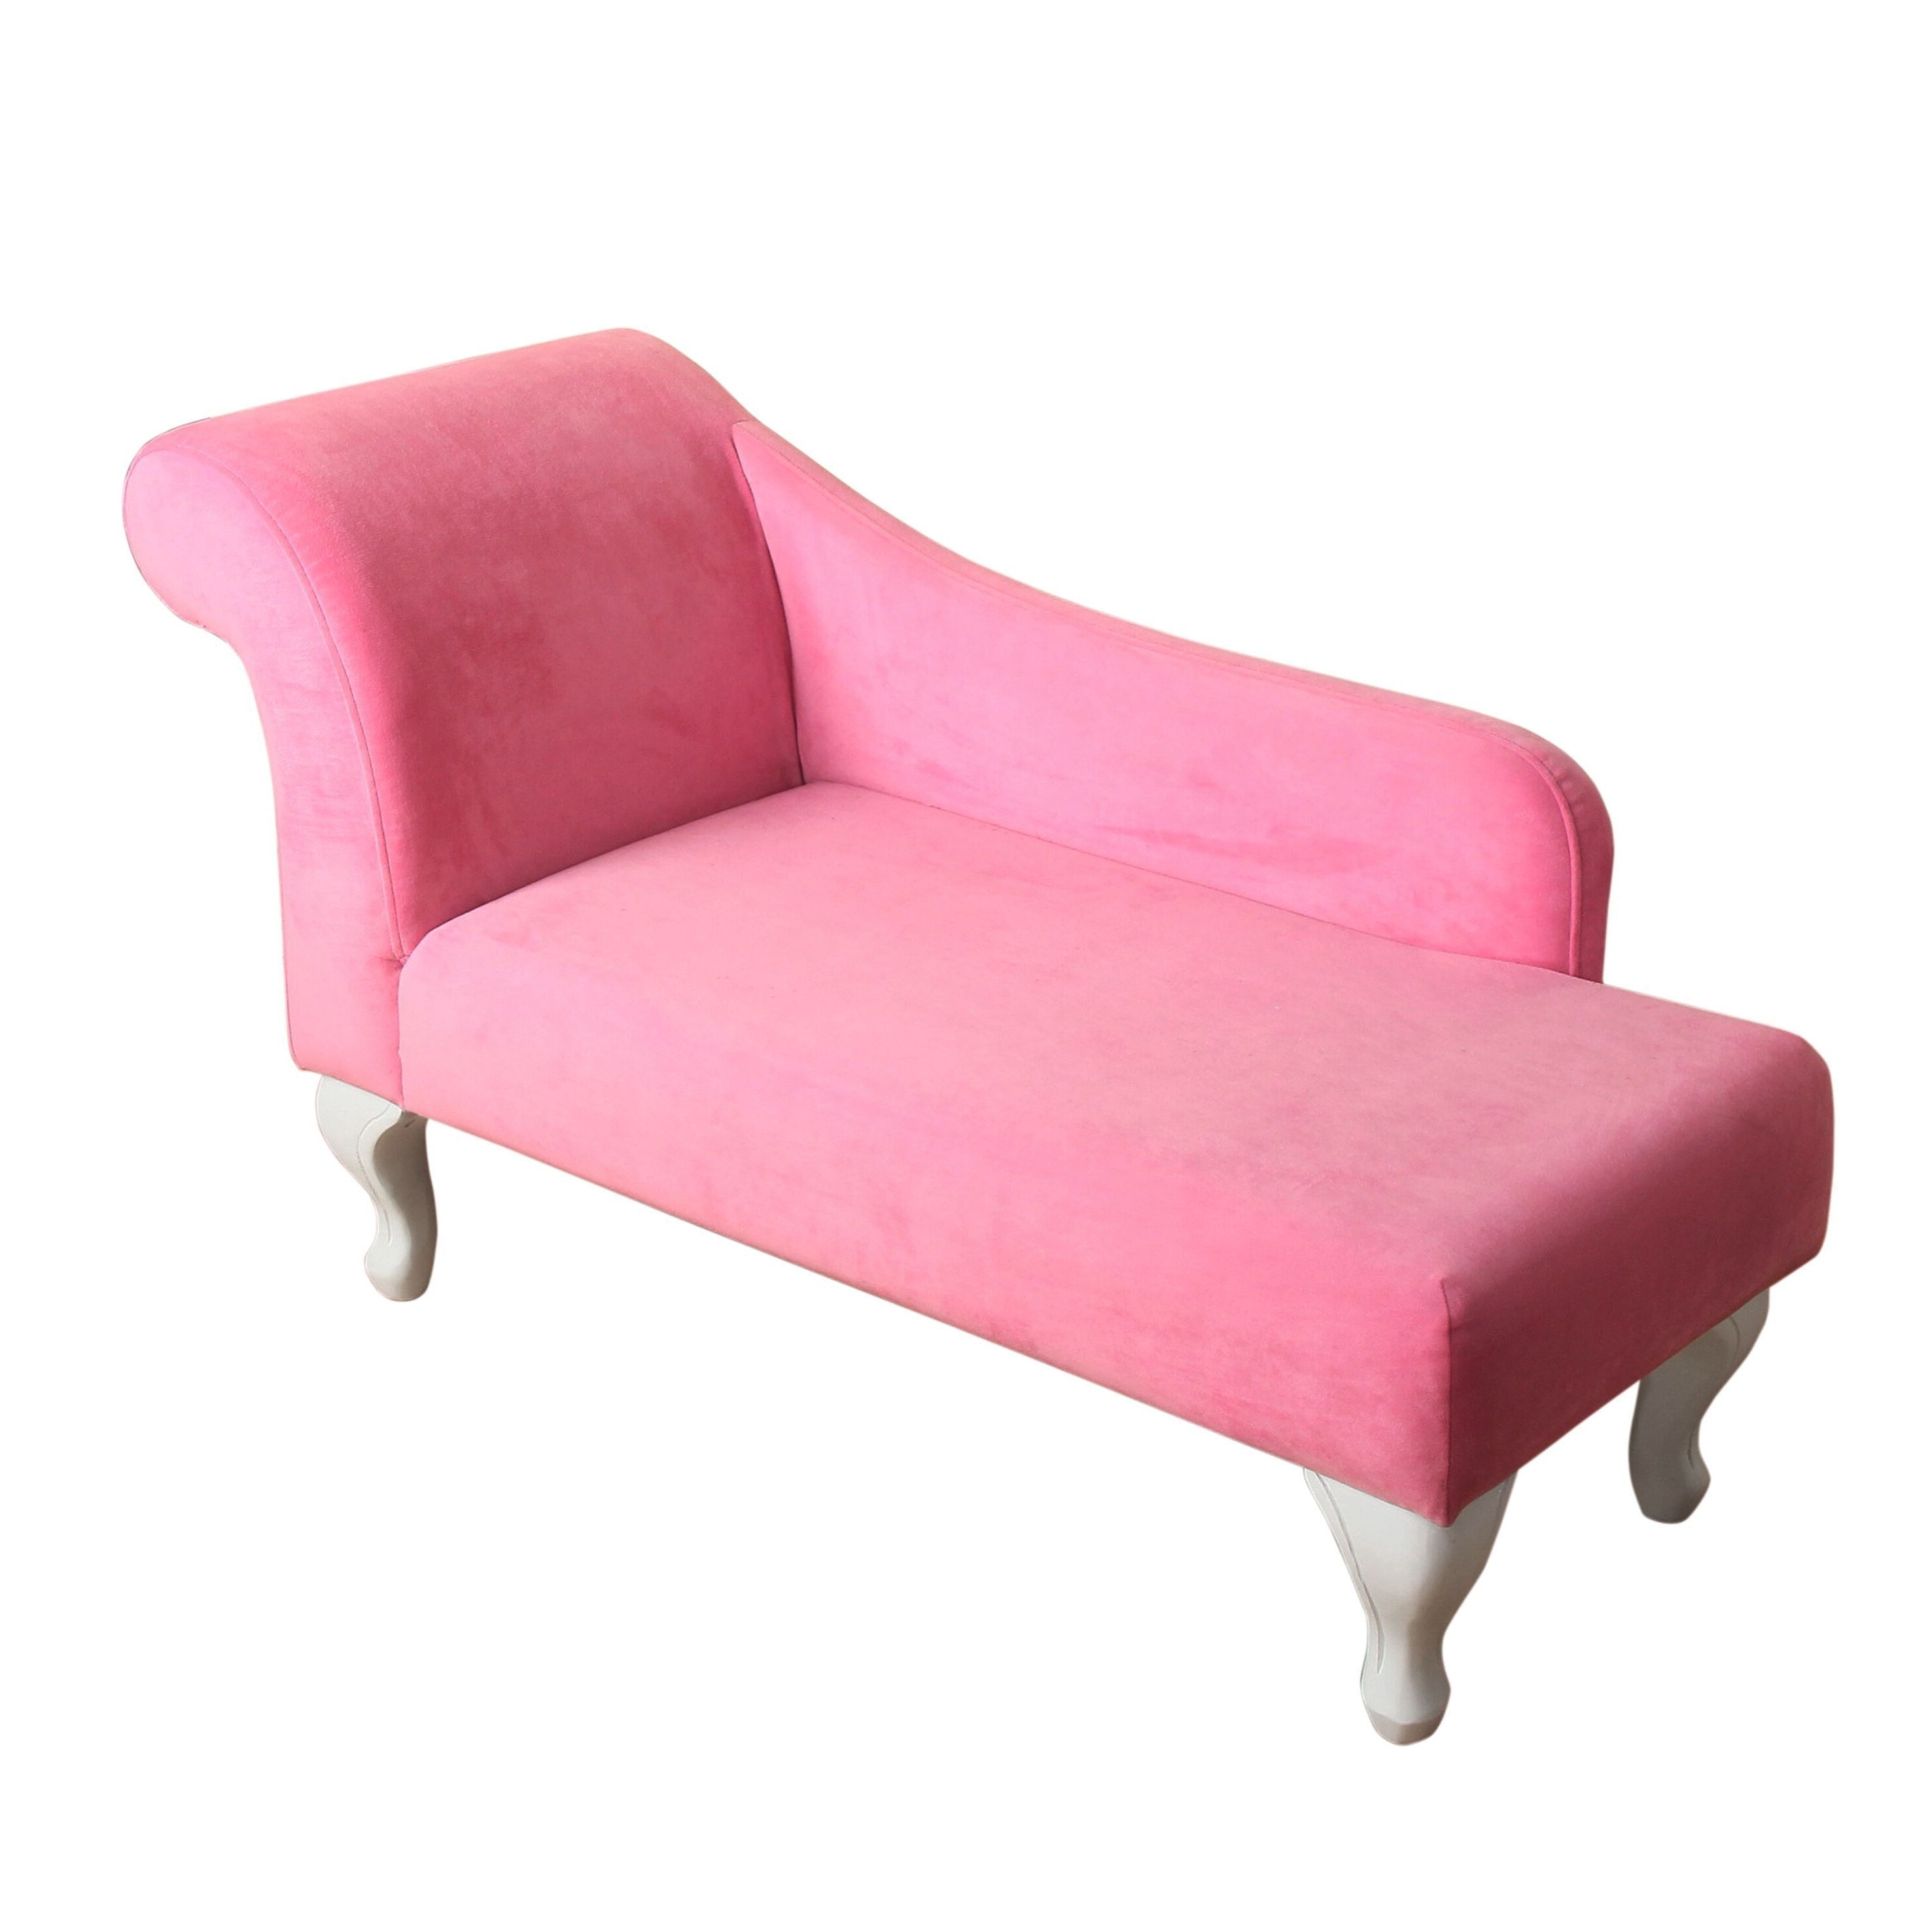 Homepop Juvenile Chaise Lounge In Pink Velvet – Free Shipping For Well Known Pink Chaise Lounges (View 4 of 15)